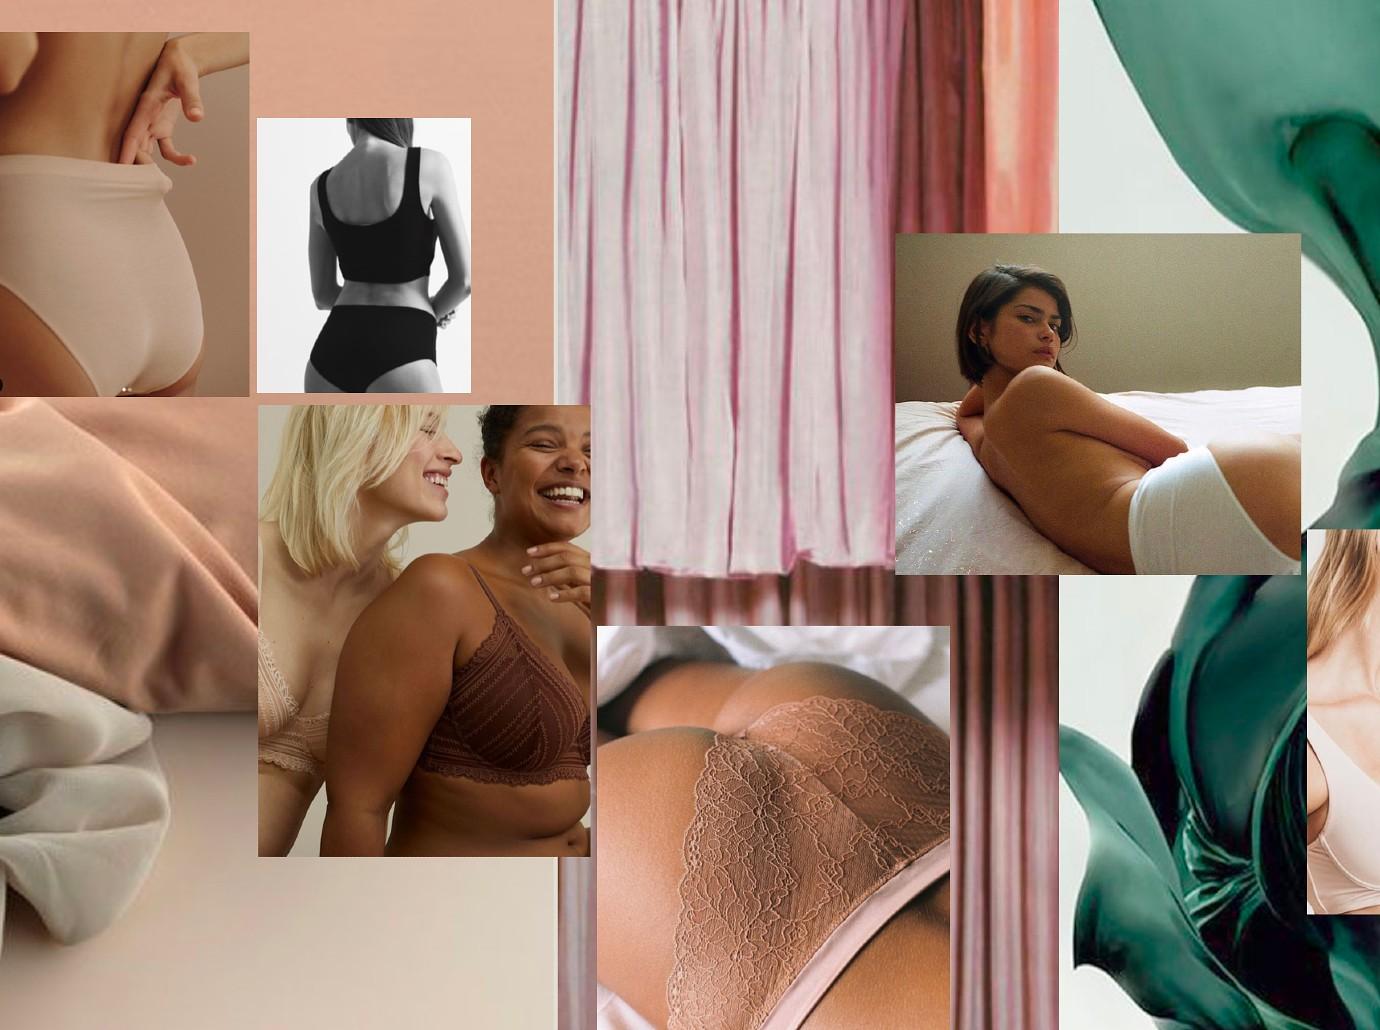 It's A Match! Make These Bra & Panty Sets Yours - Bare Necessities